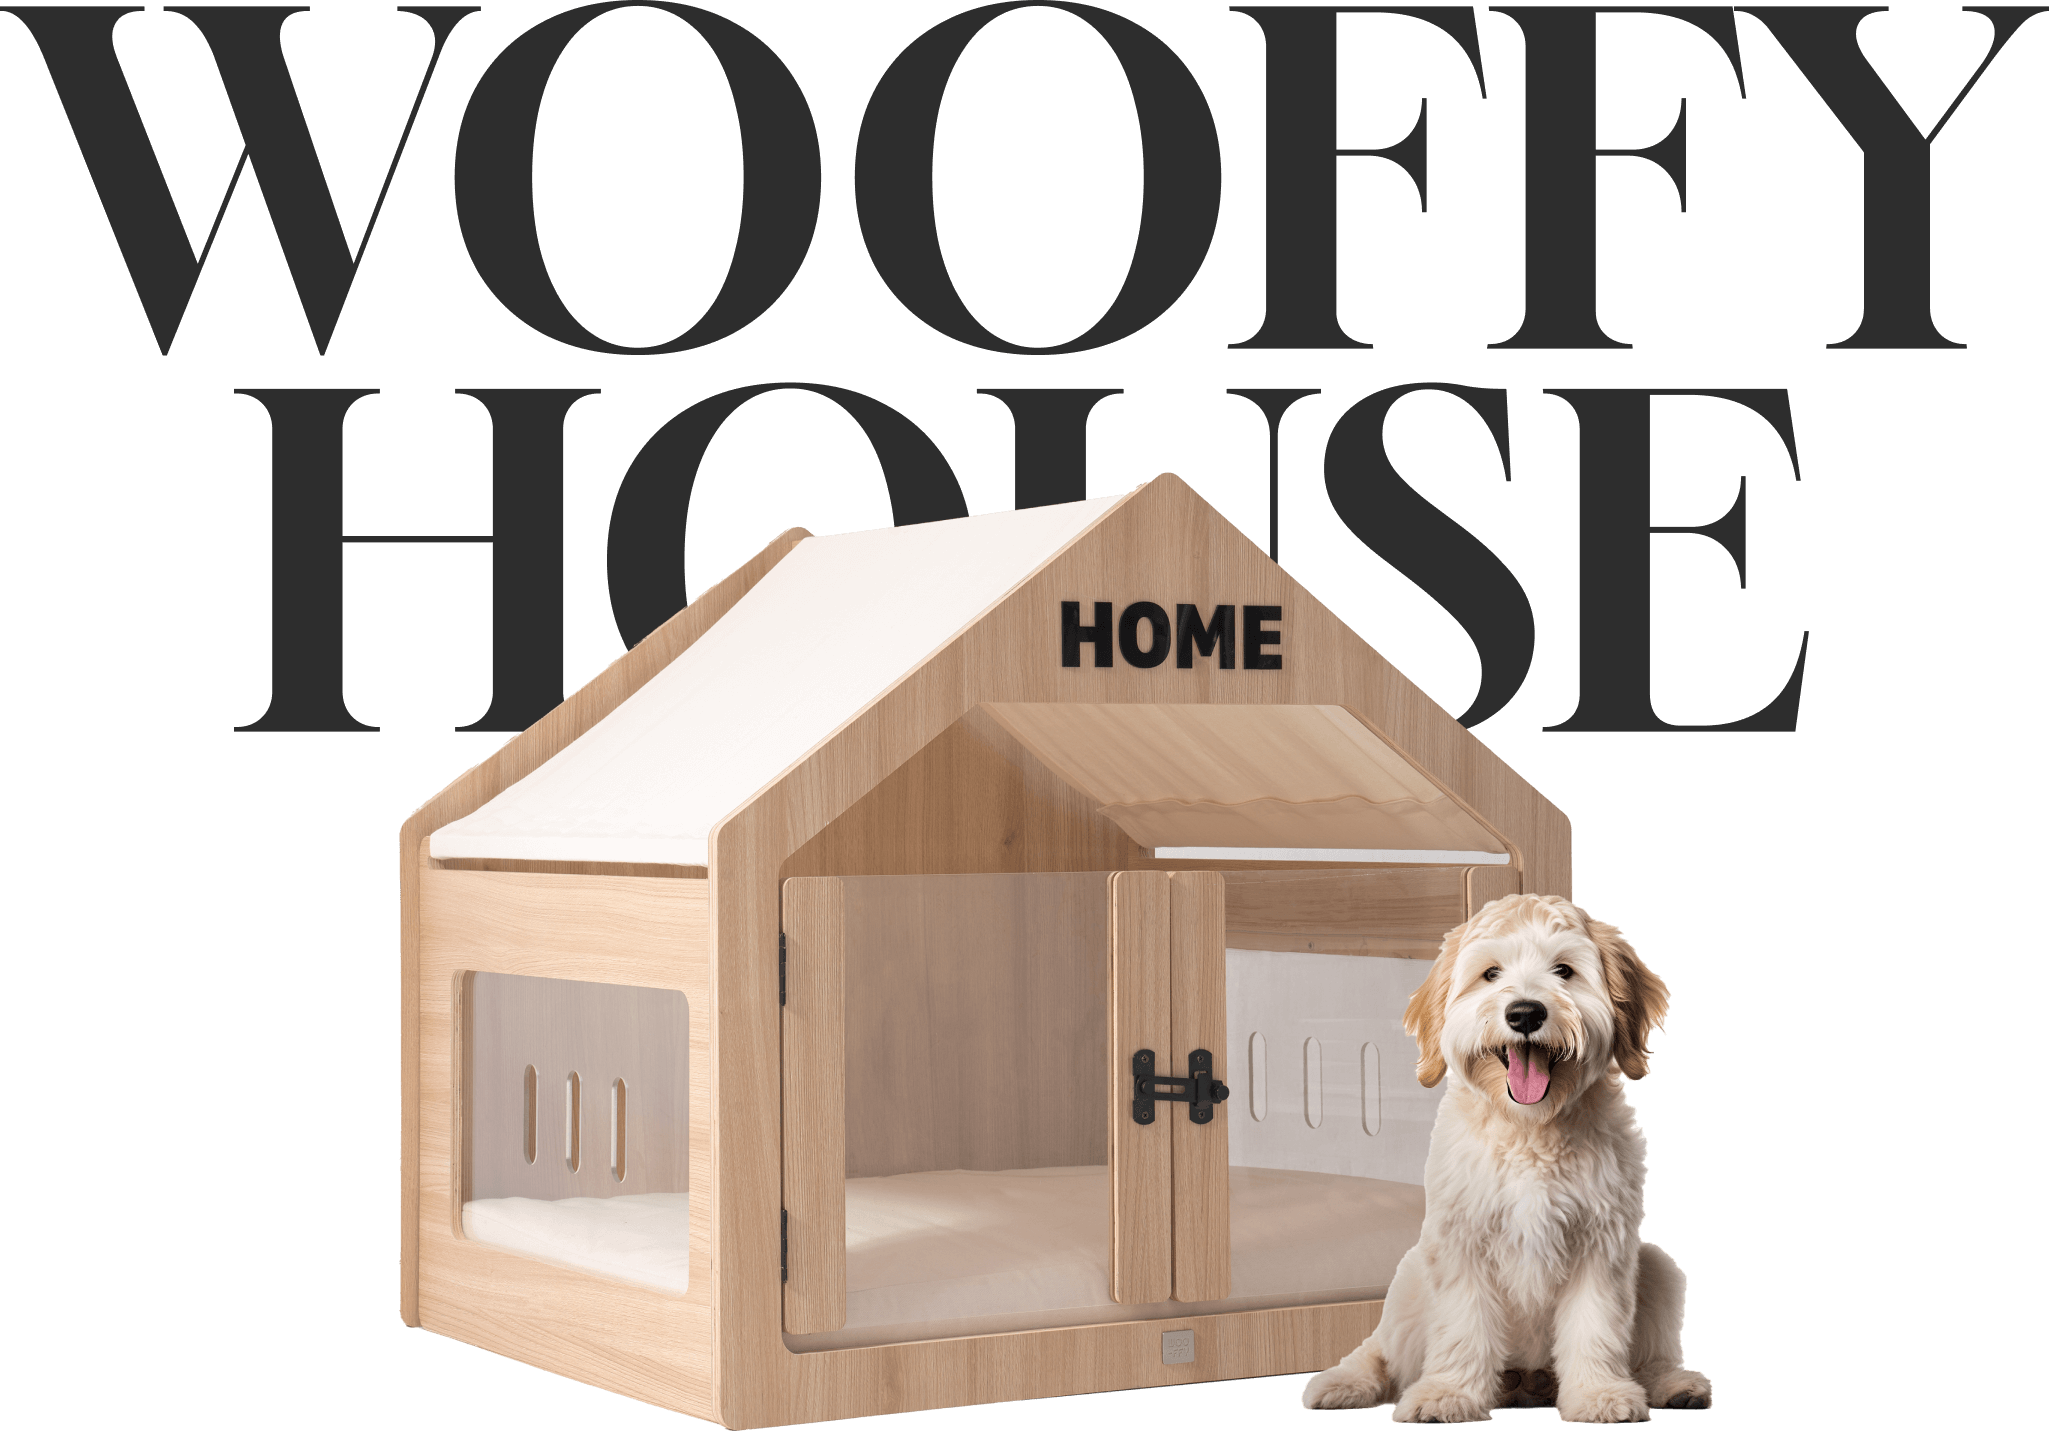 A puppy sit next to the Wooffy modern dog house